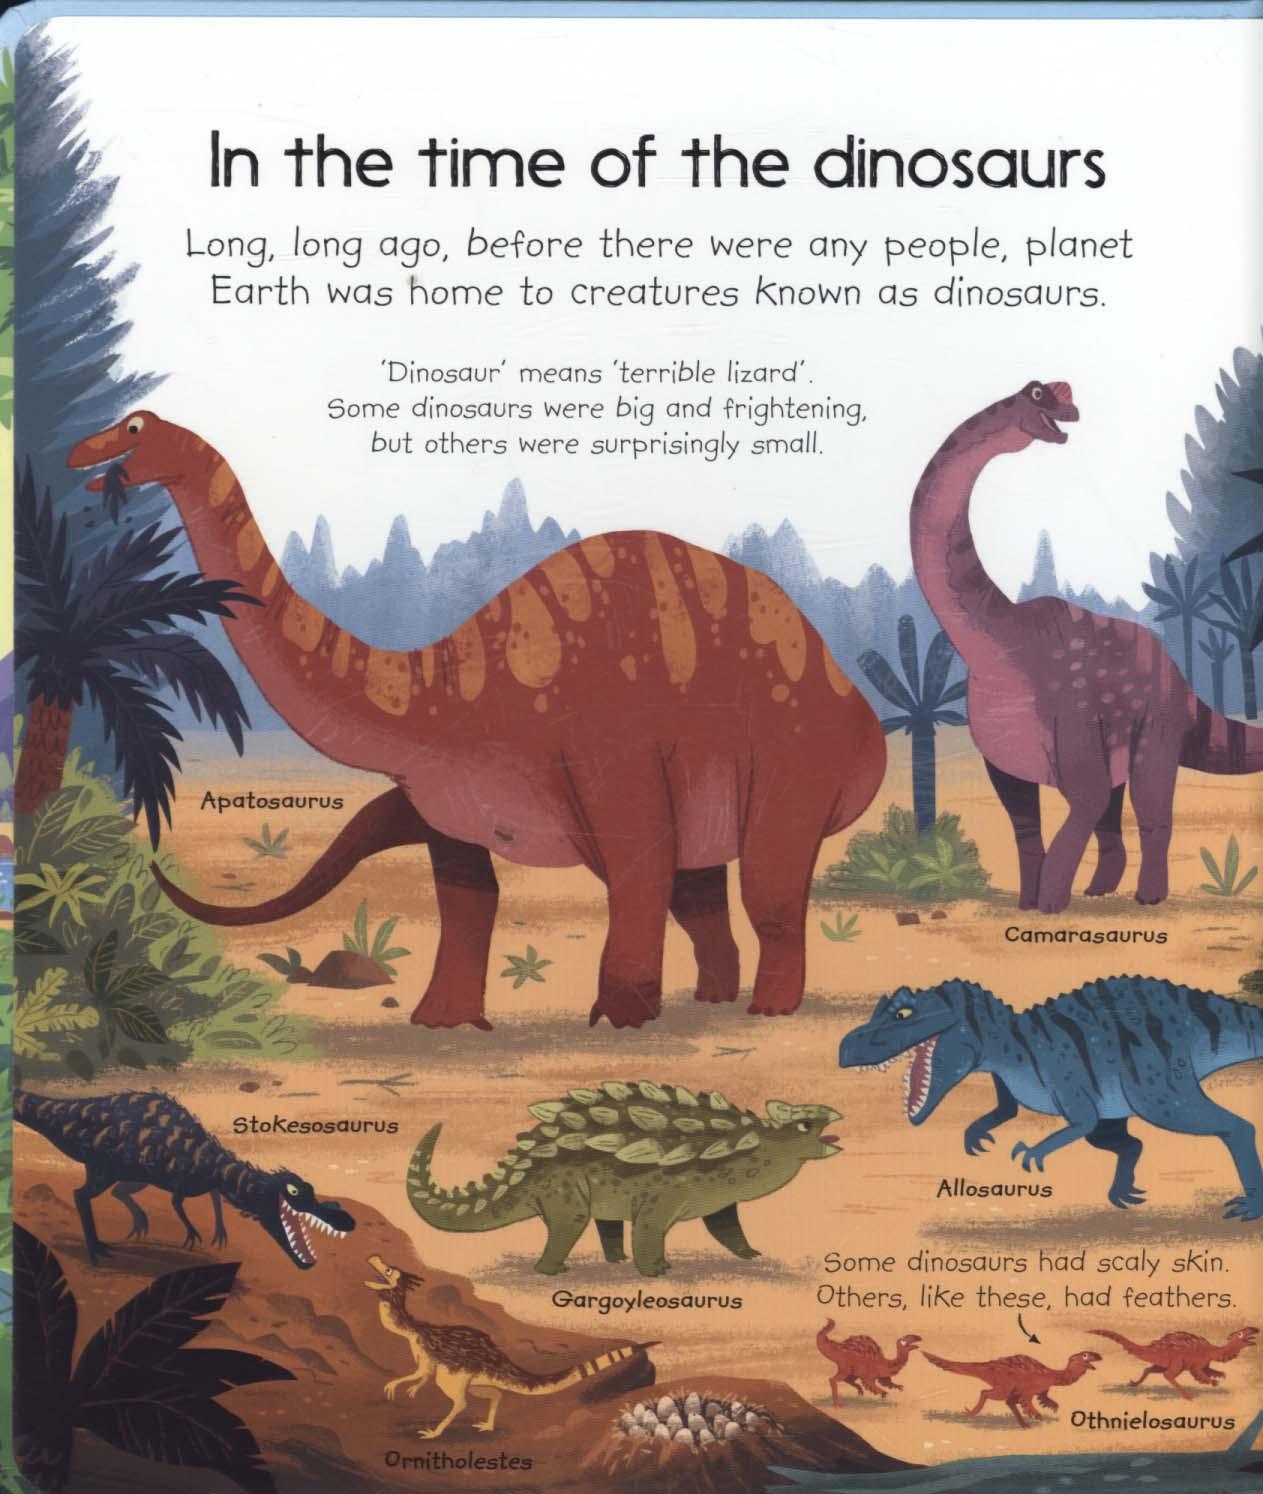 My Very First Dinosaurs Book